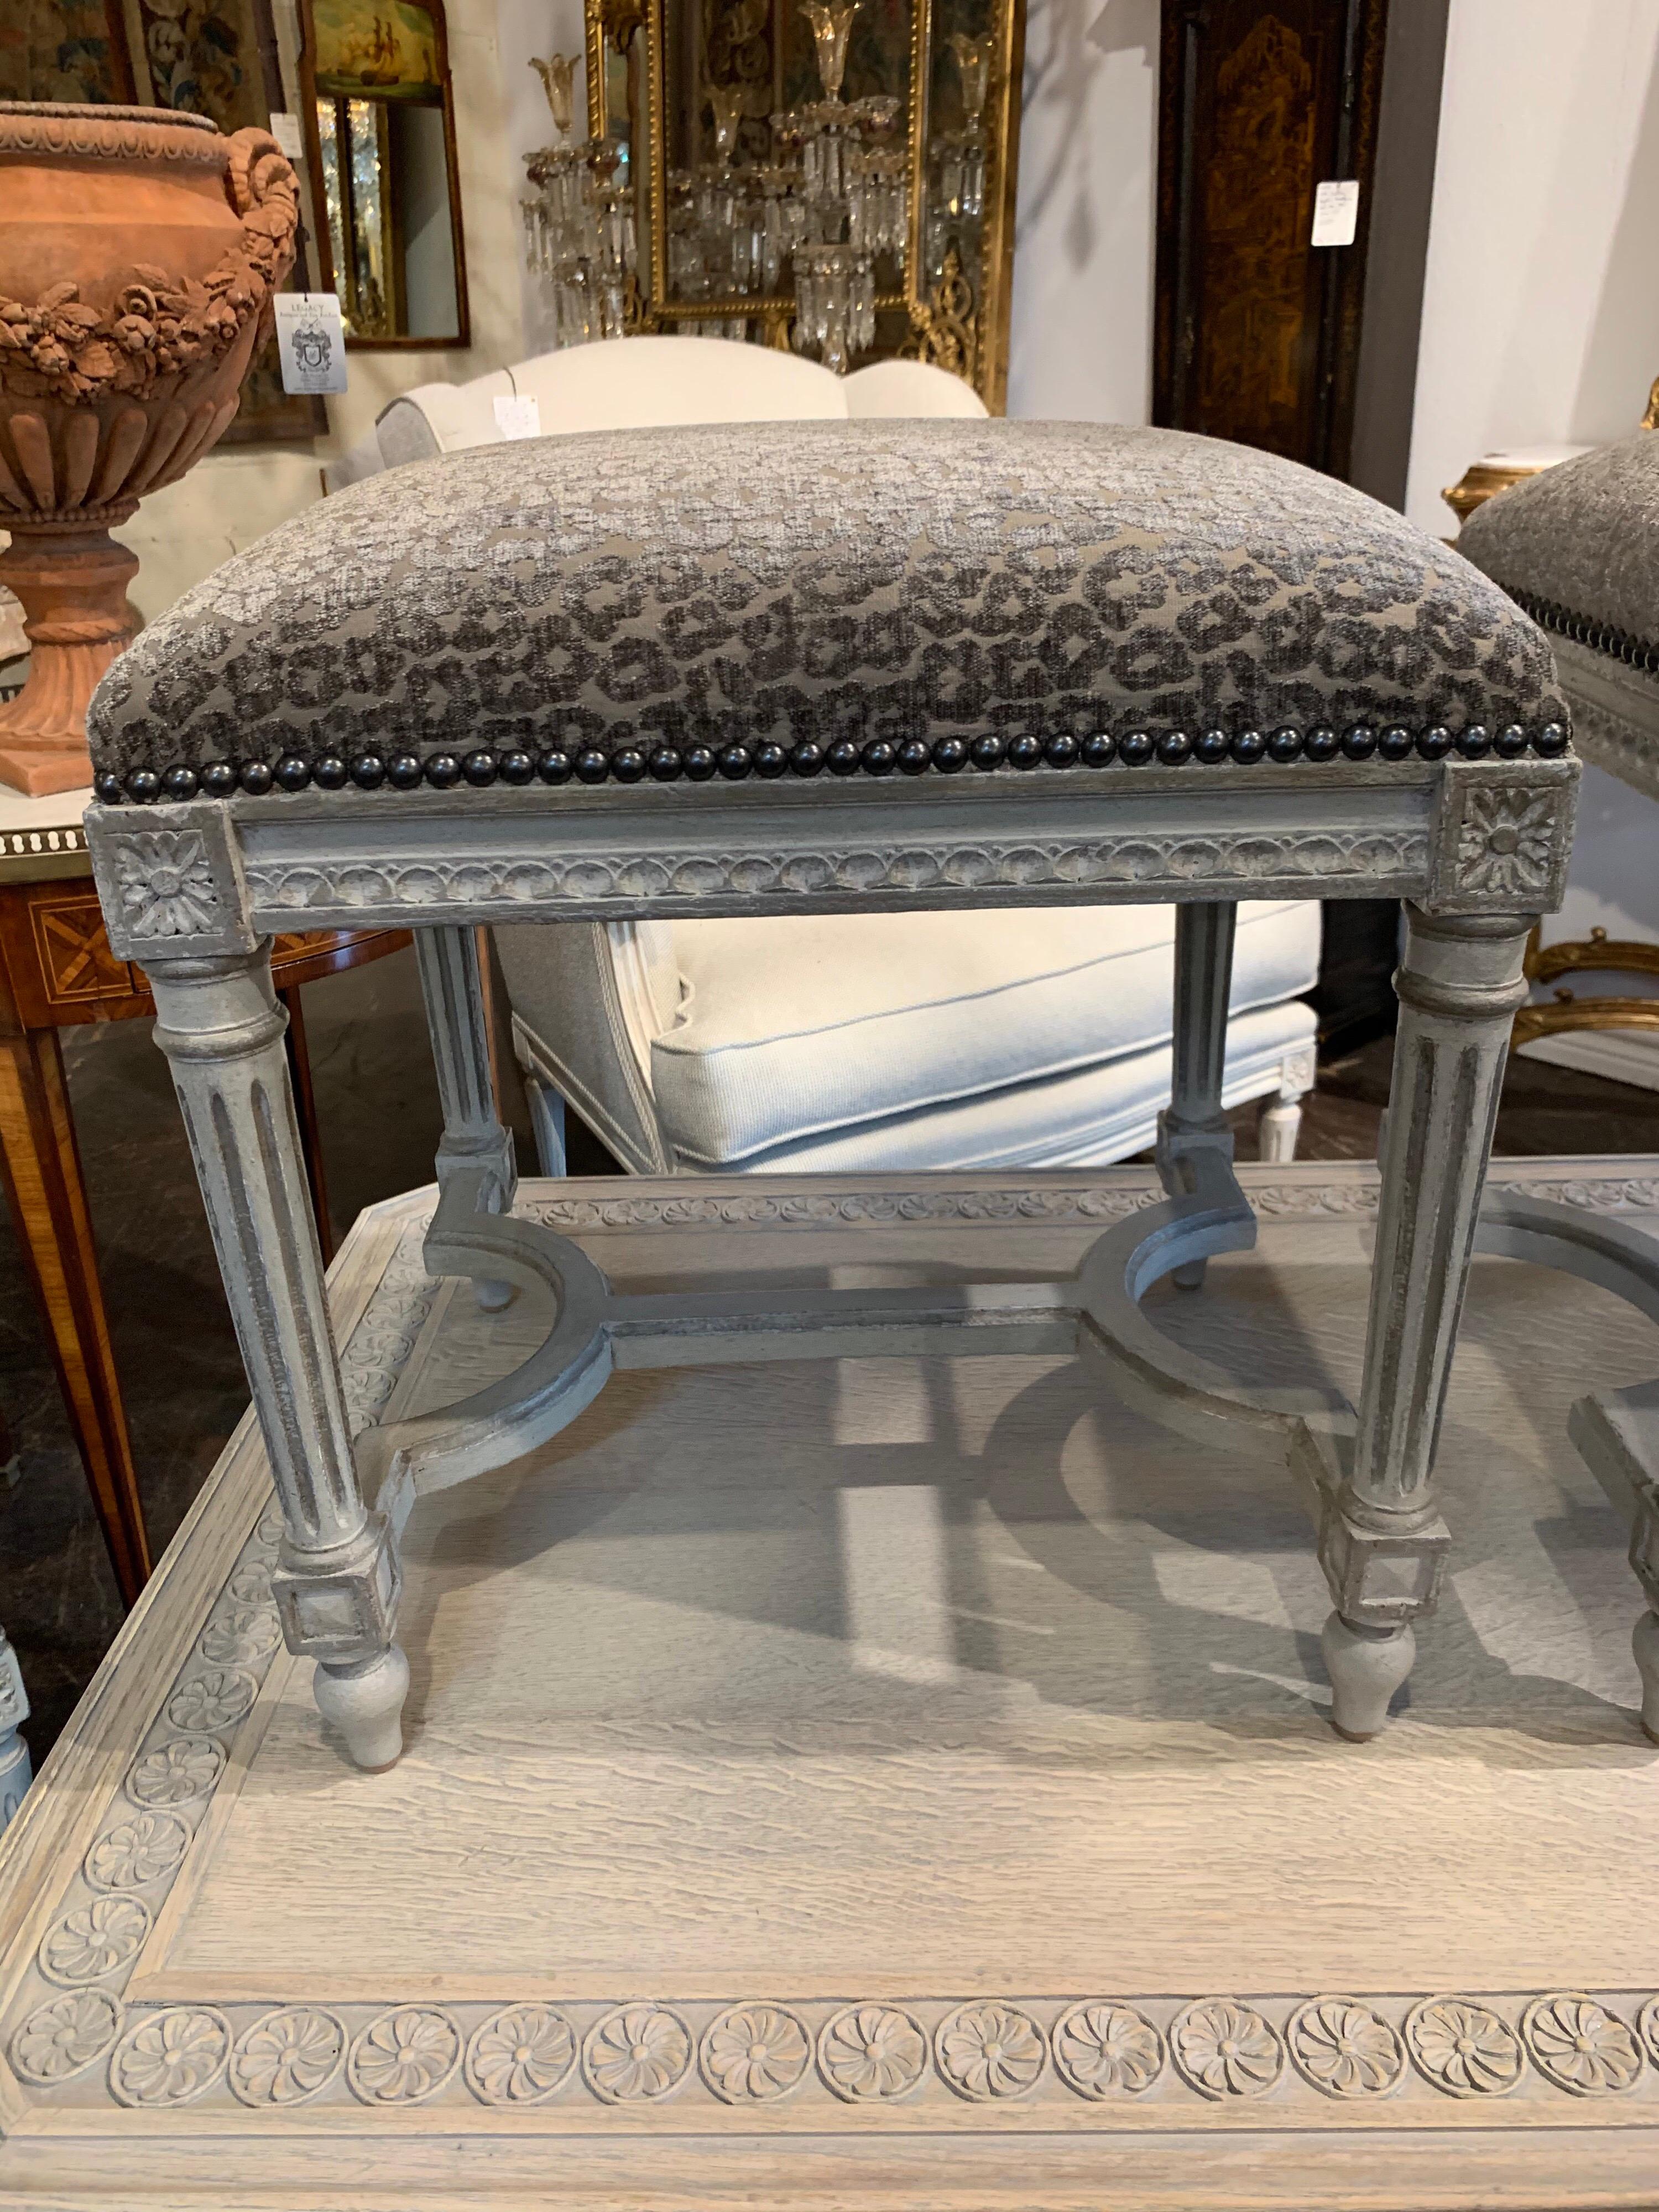 Very pretty pair of French Louis XVI style carved and painted stool. These are painted in light grey and upholstered in a nice animal print. Beautiful patina on the finish. A stylish pair that fits well in a multitude of decors!